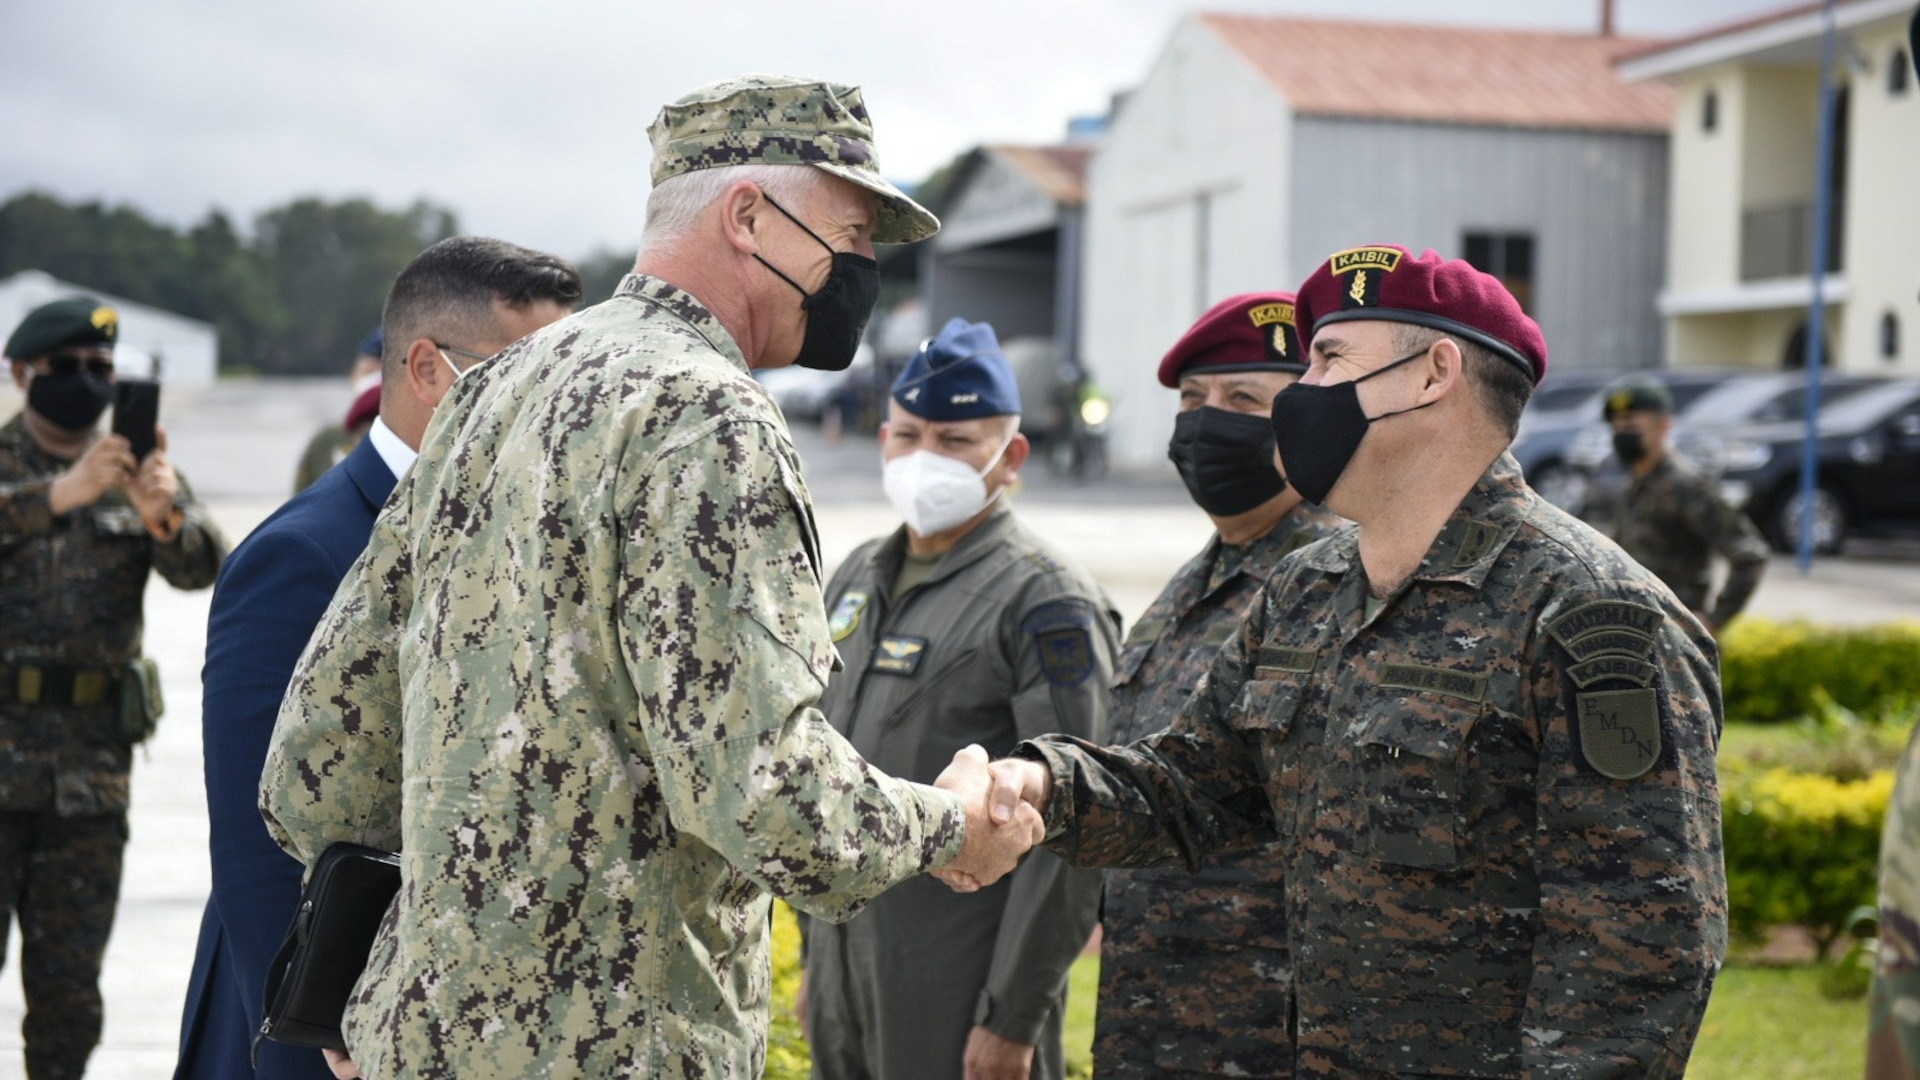 U.S. Navy Adm. Craig S. Faller, commander of U.S. Southern Command, visits with Guatemalan military members.